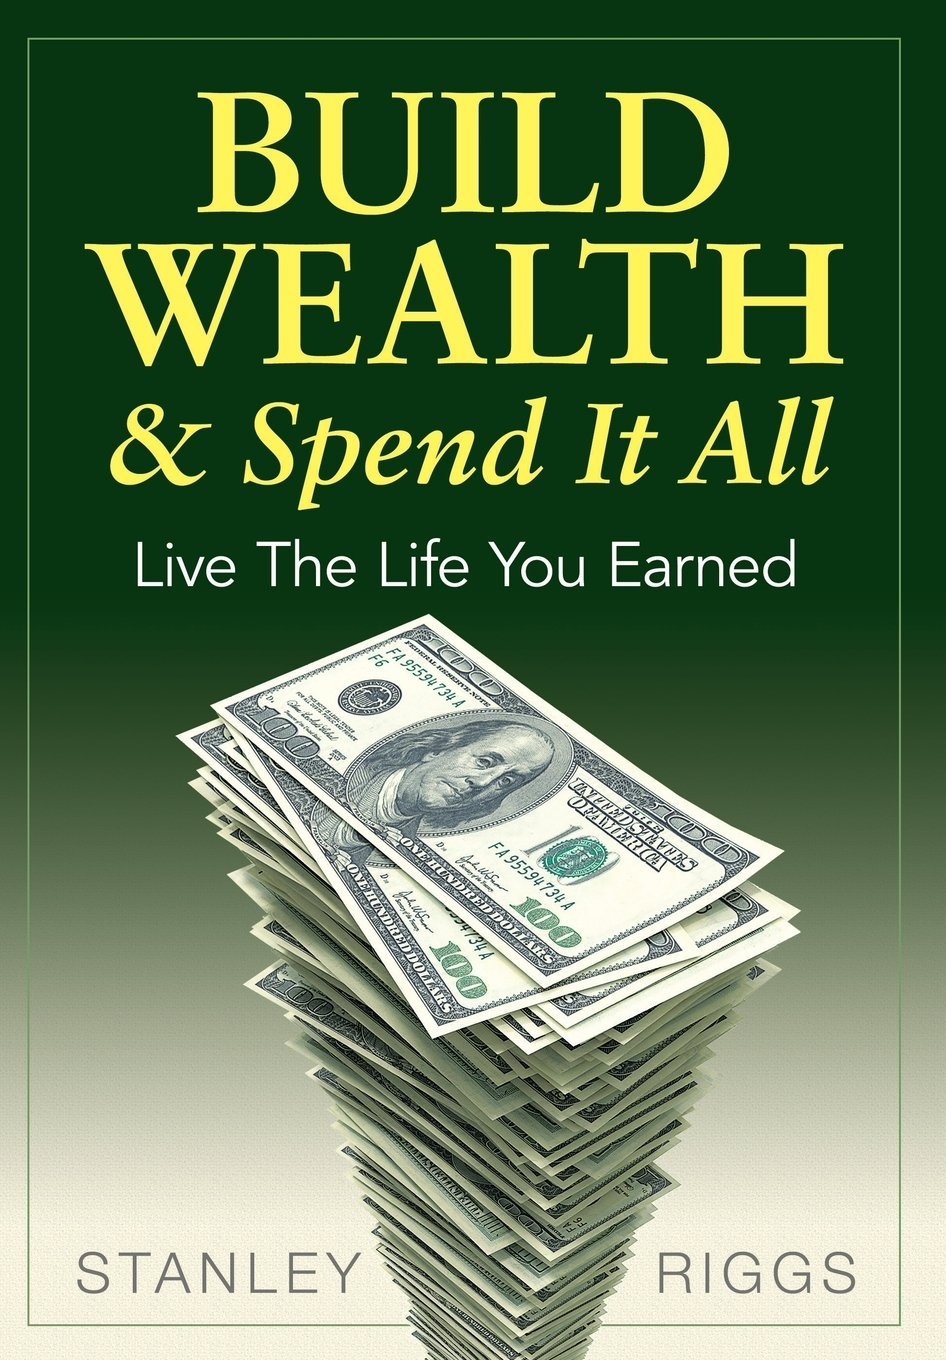 wealth plan book review